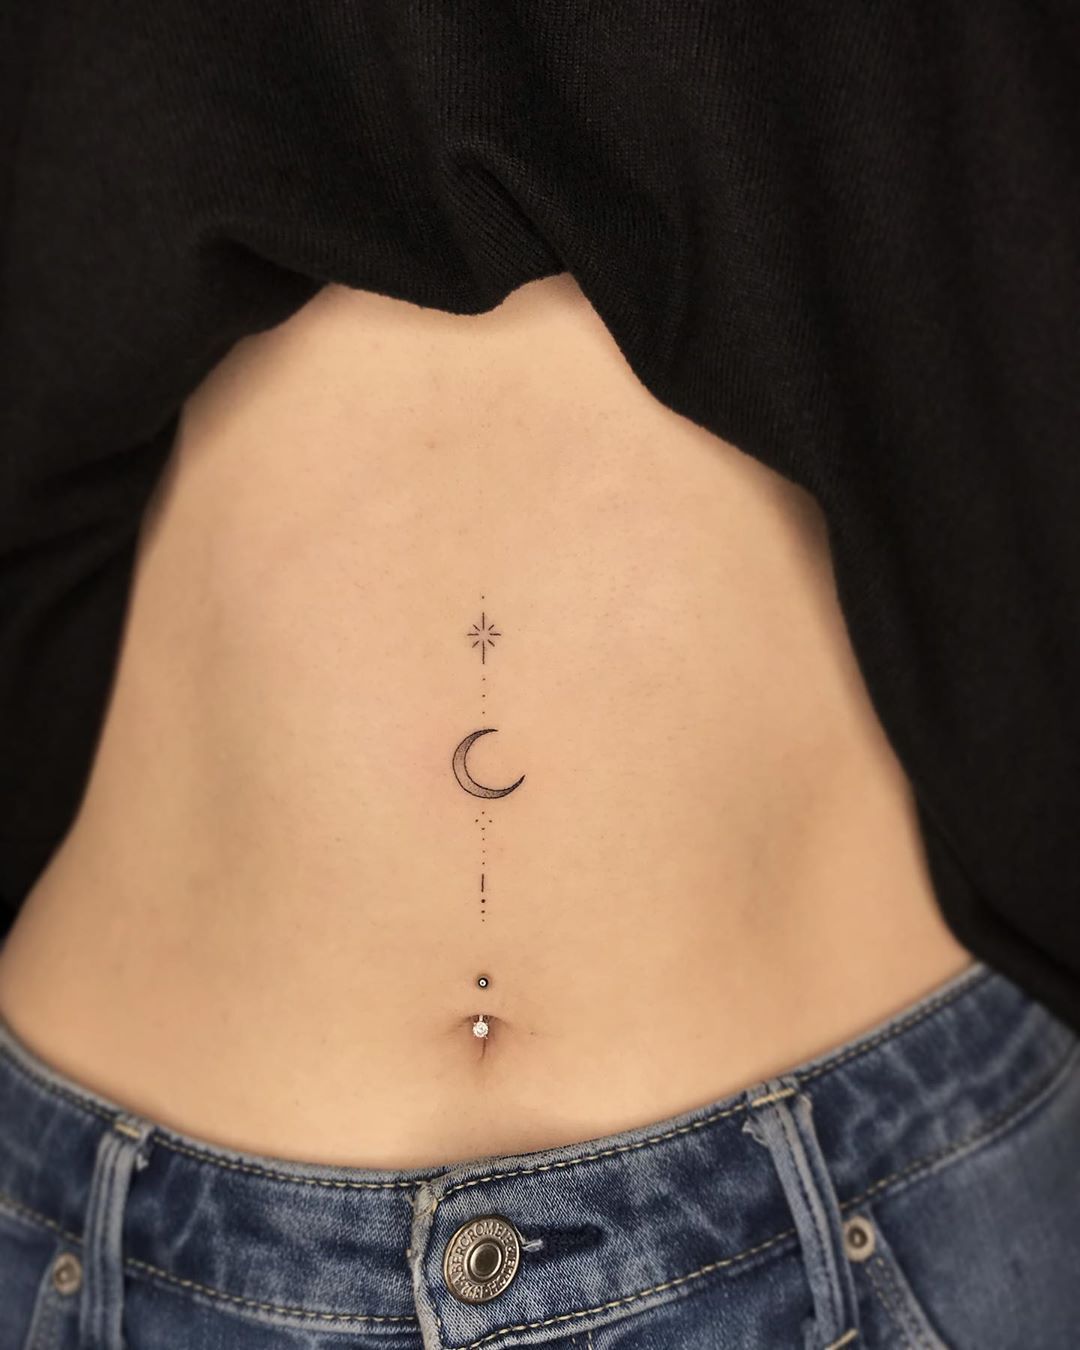 1800 Female Stomach Tattoos Stock Photos Pictures  RoyaltyFree Images   iStock